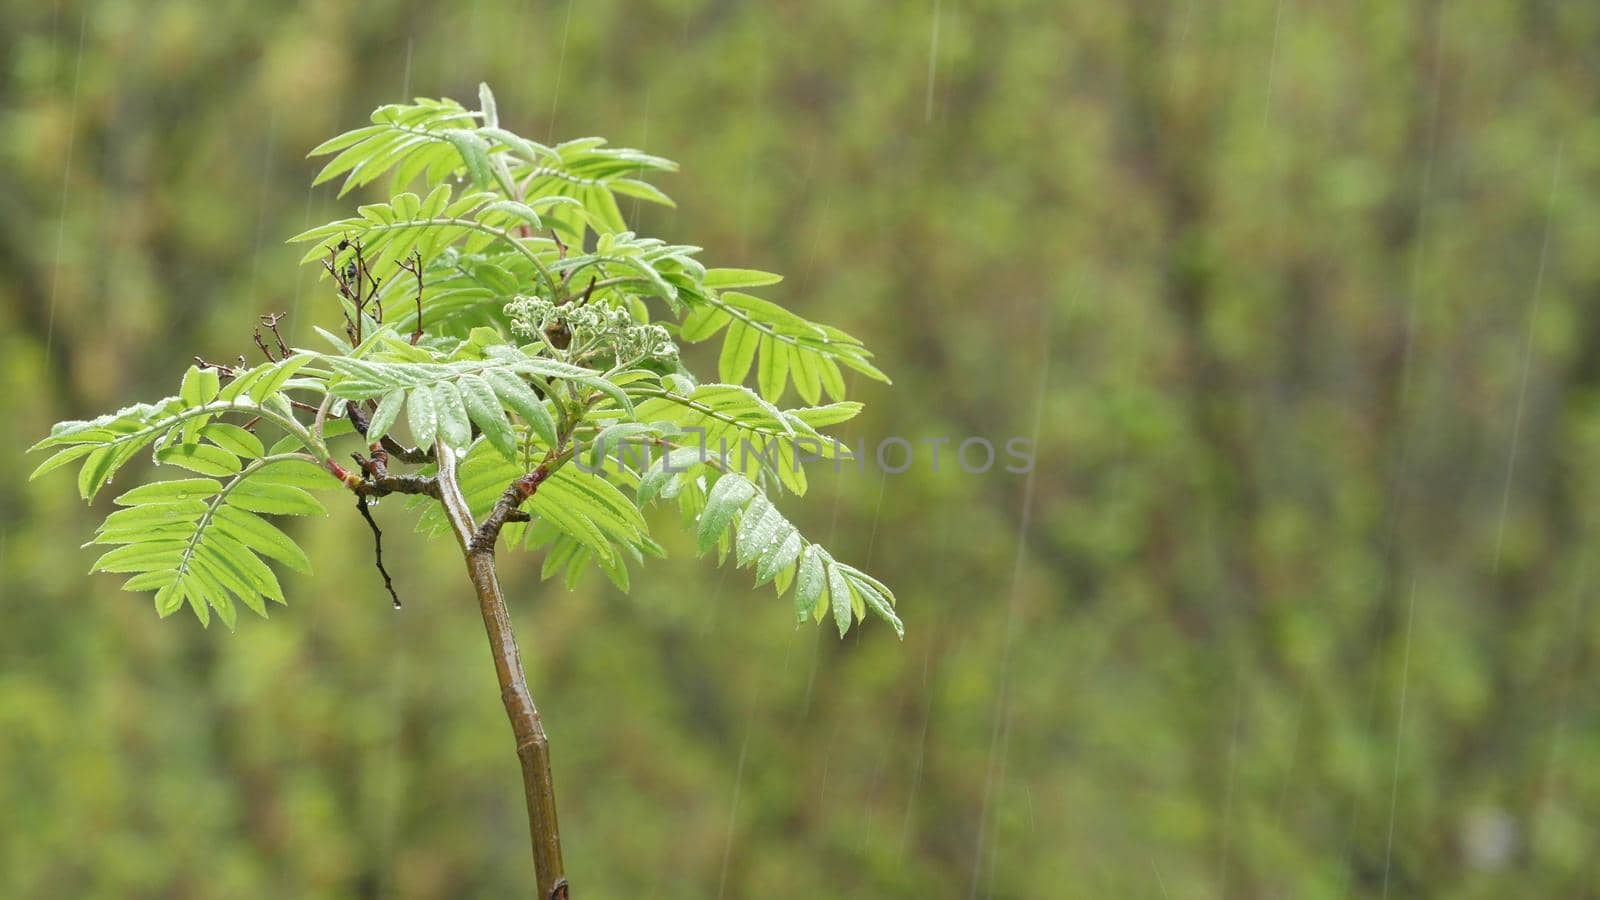 Rain drops falling, fresh green juicy leaves in spring forest. Droplets on springtime wet trees foliage. Moist greenery, rainy weather. Raindrops water refreshing plants in woods. Rainfall and canopy.